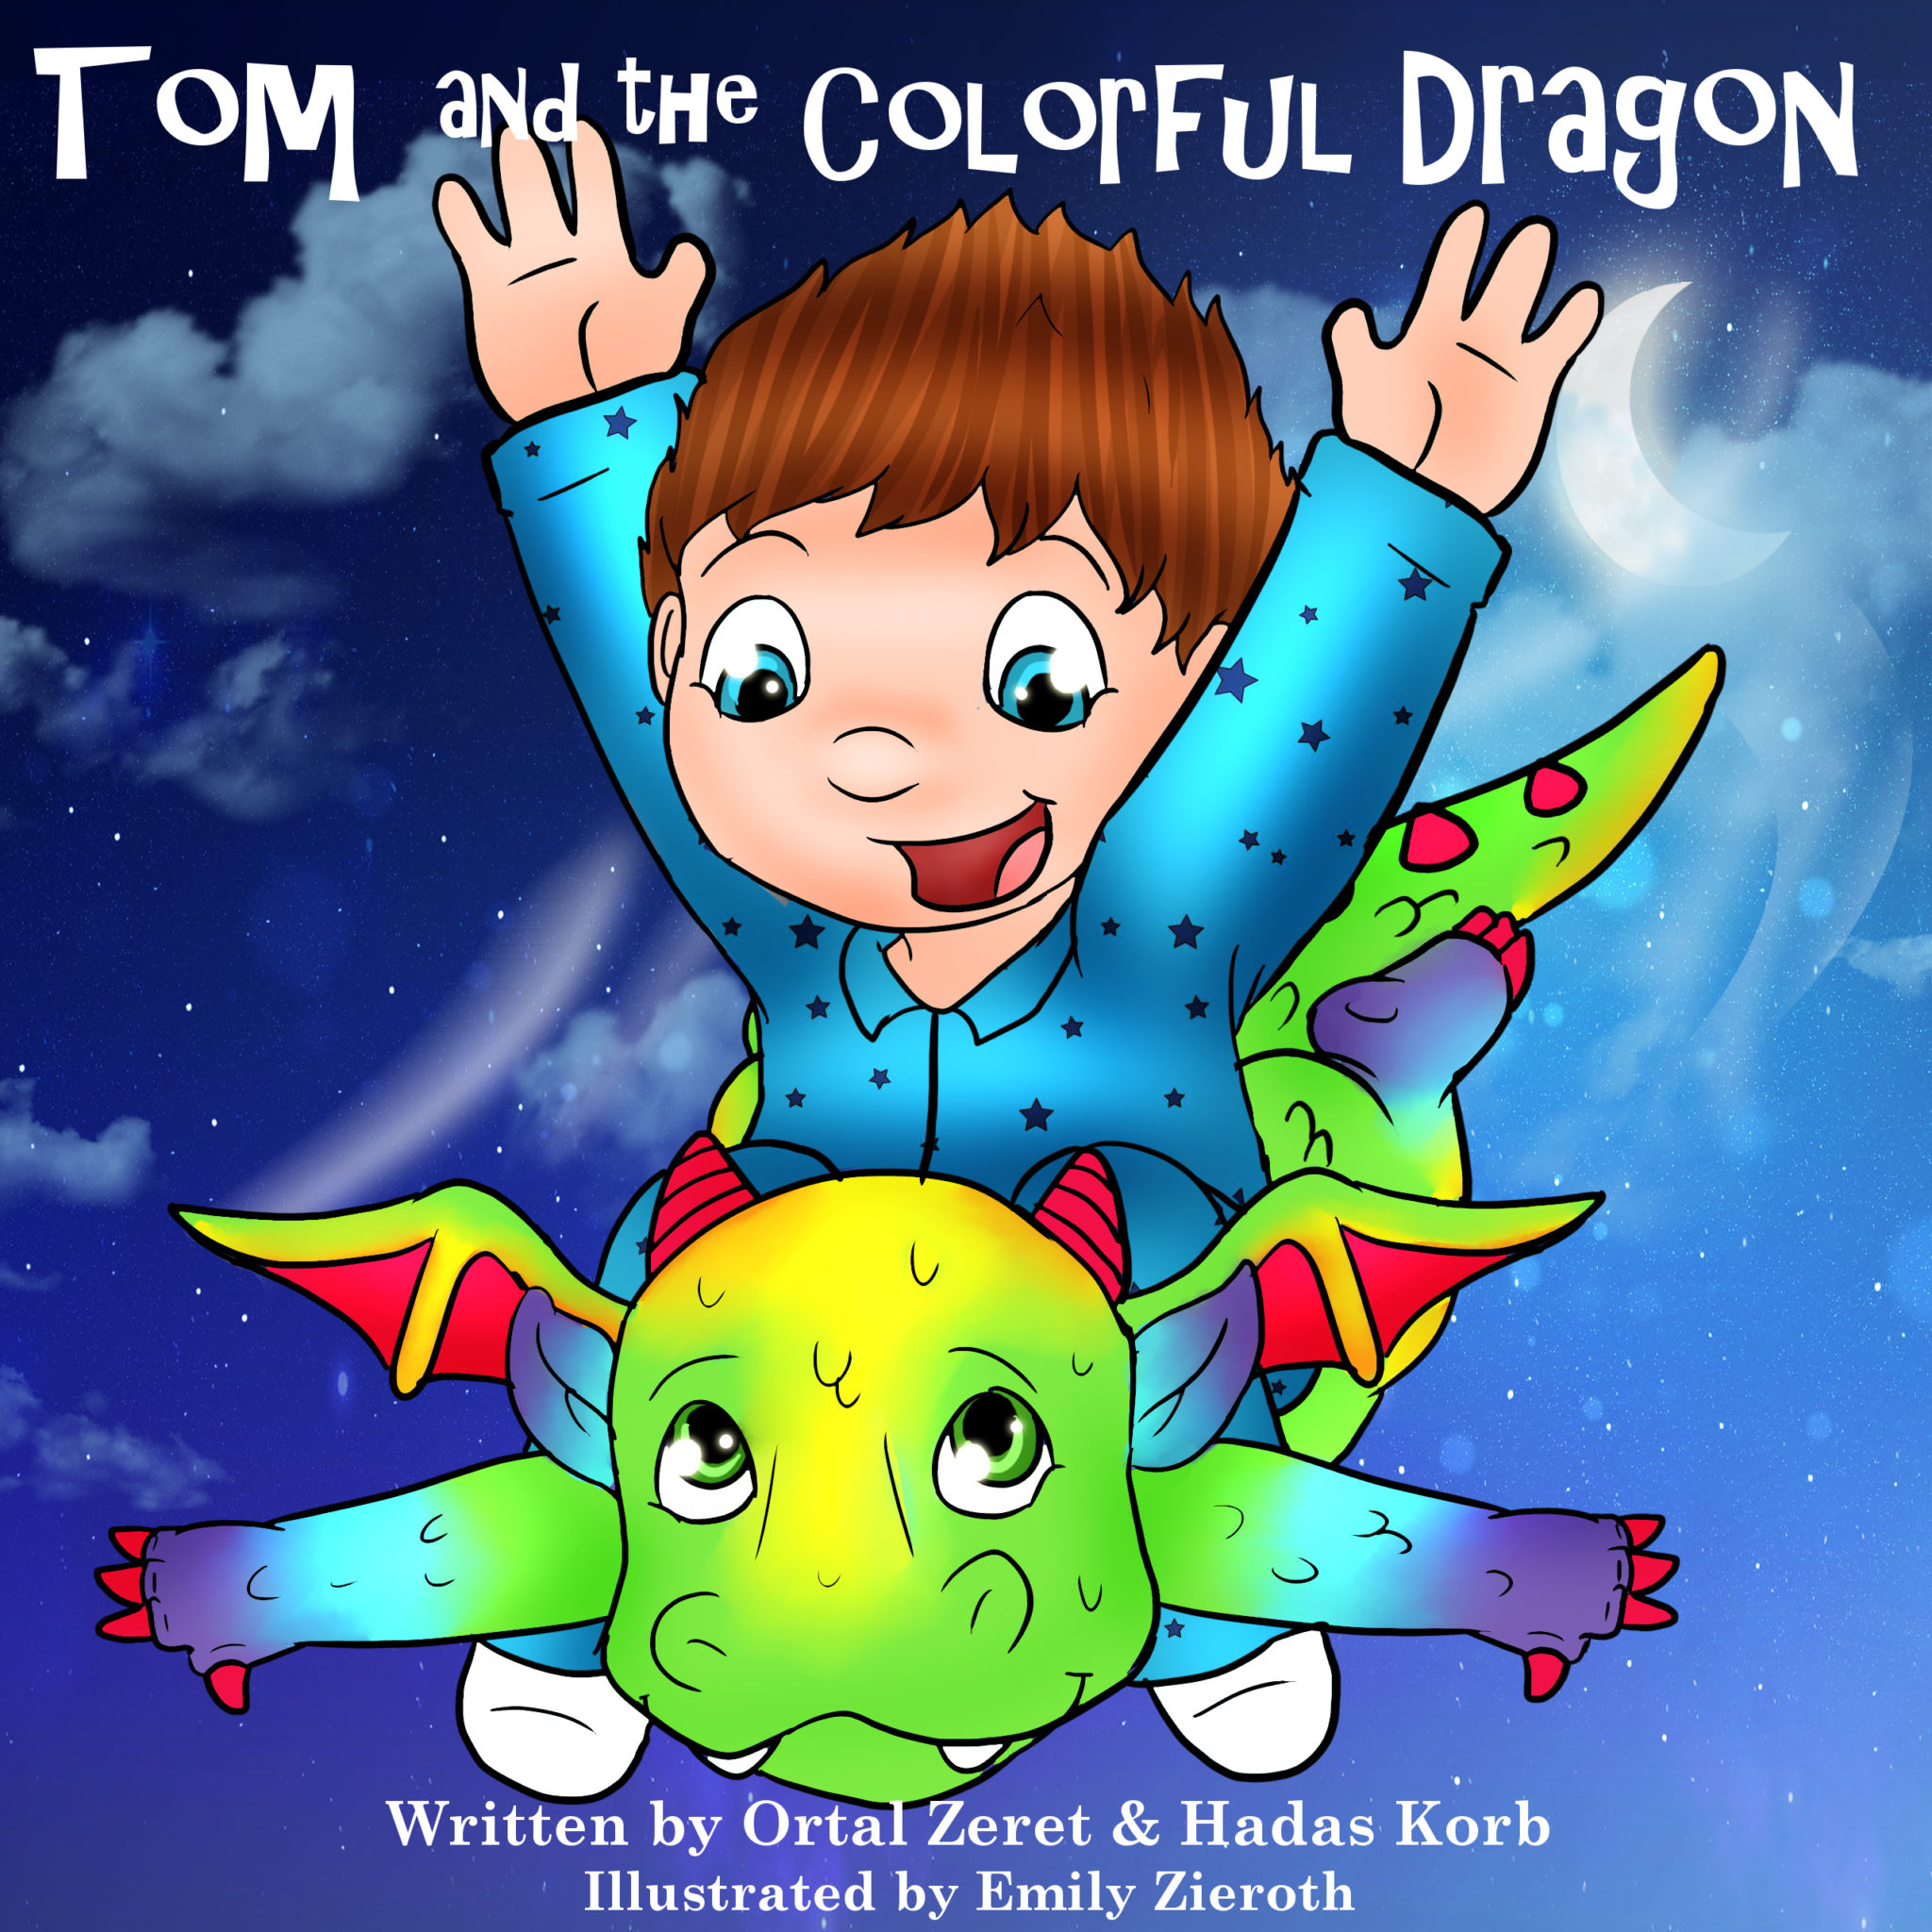 FREE: Tom and the Colorful Dragon by Hadas Korb and Ortal Zeret